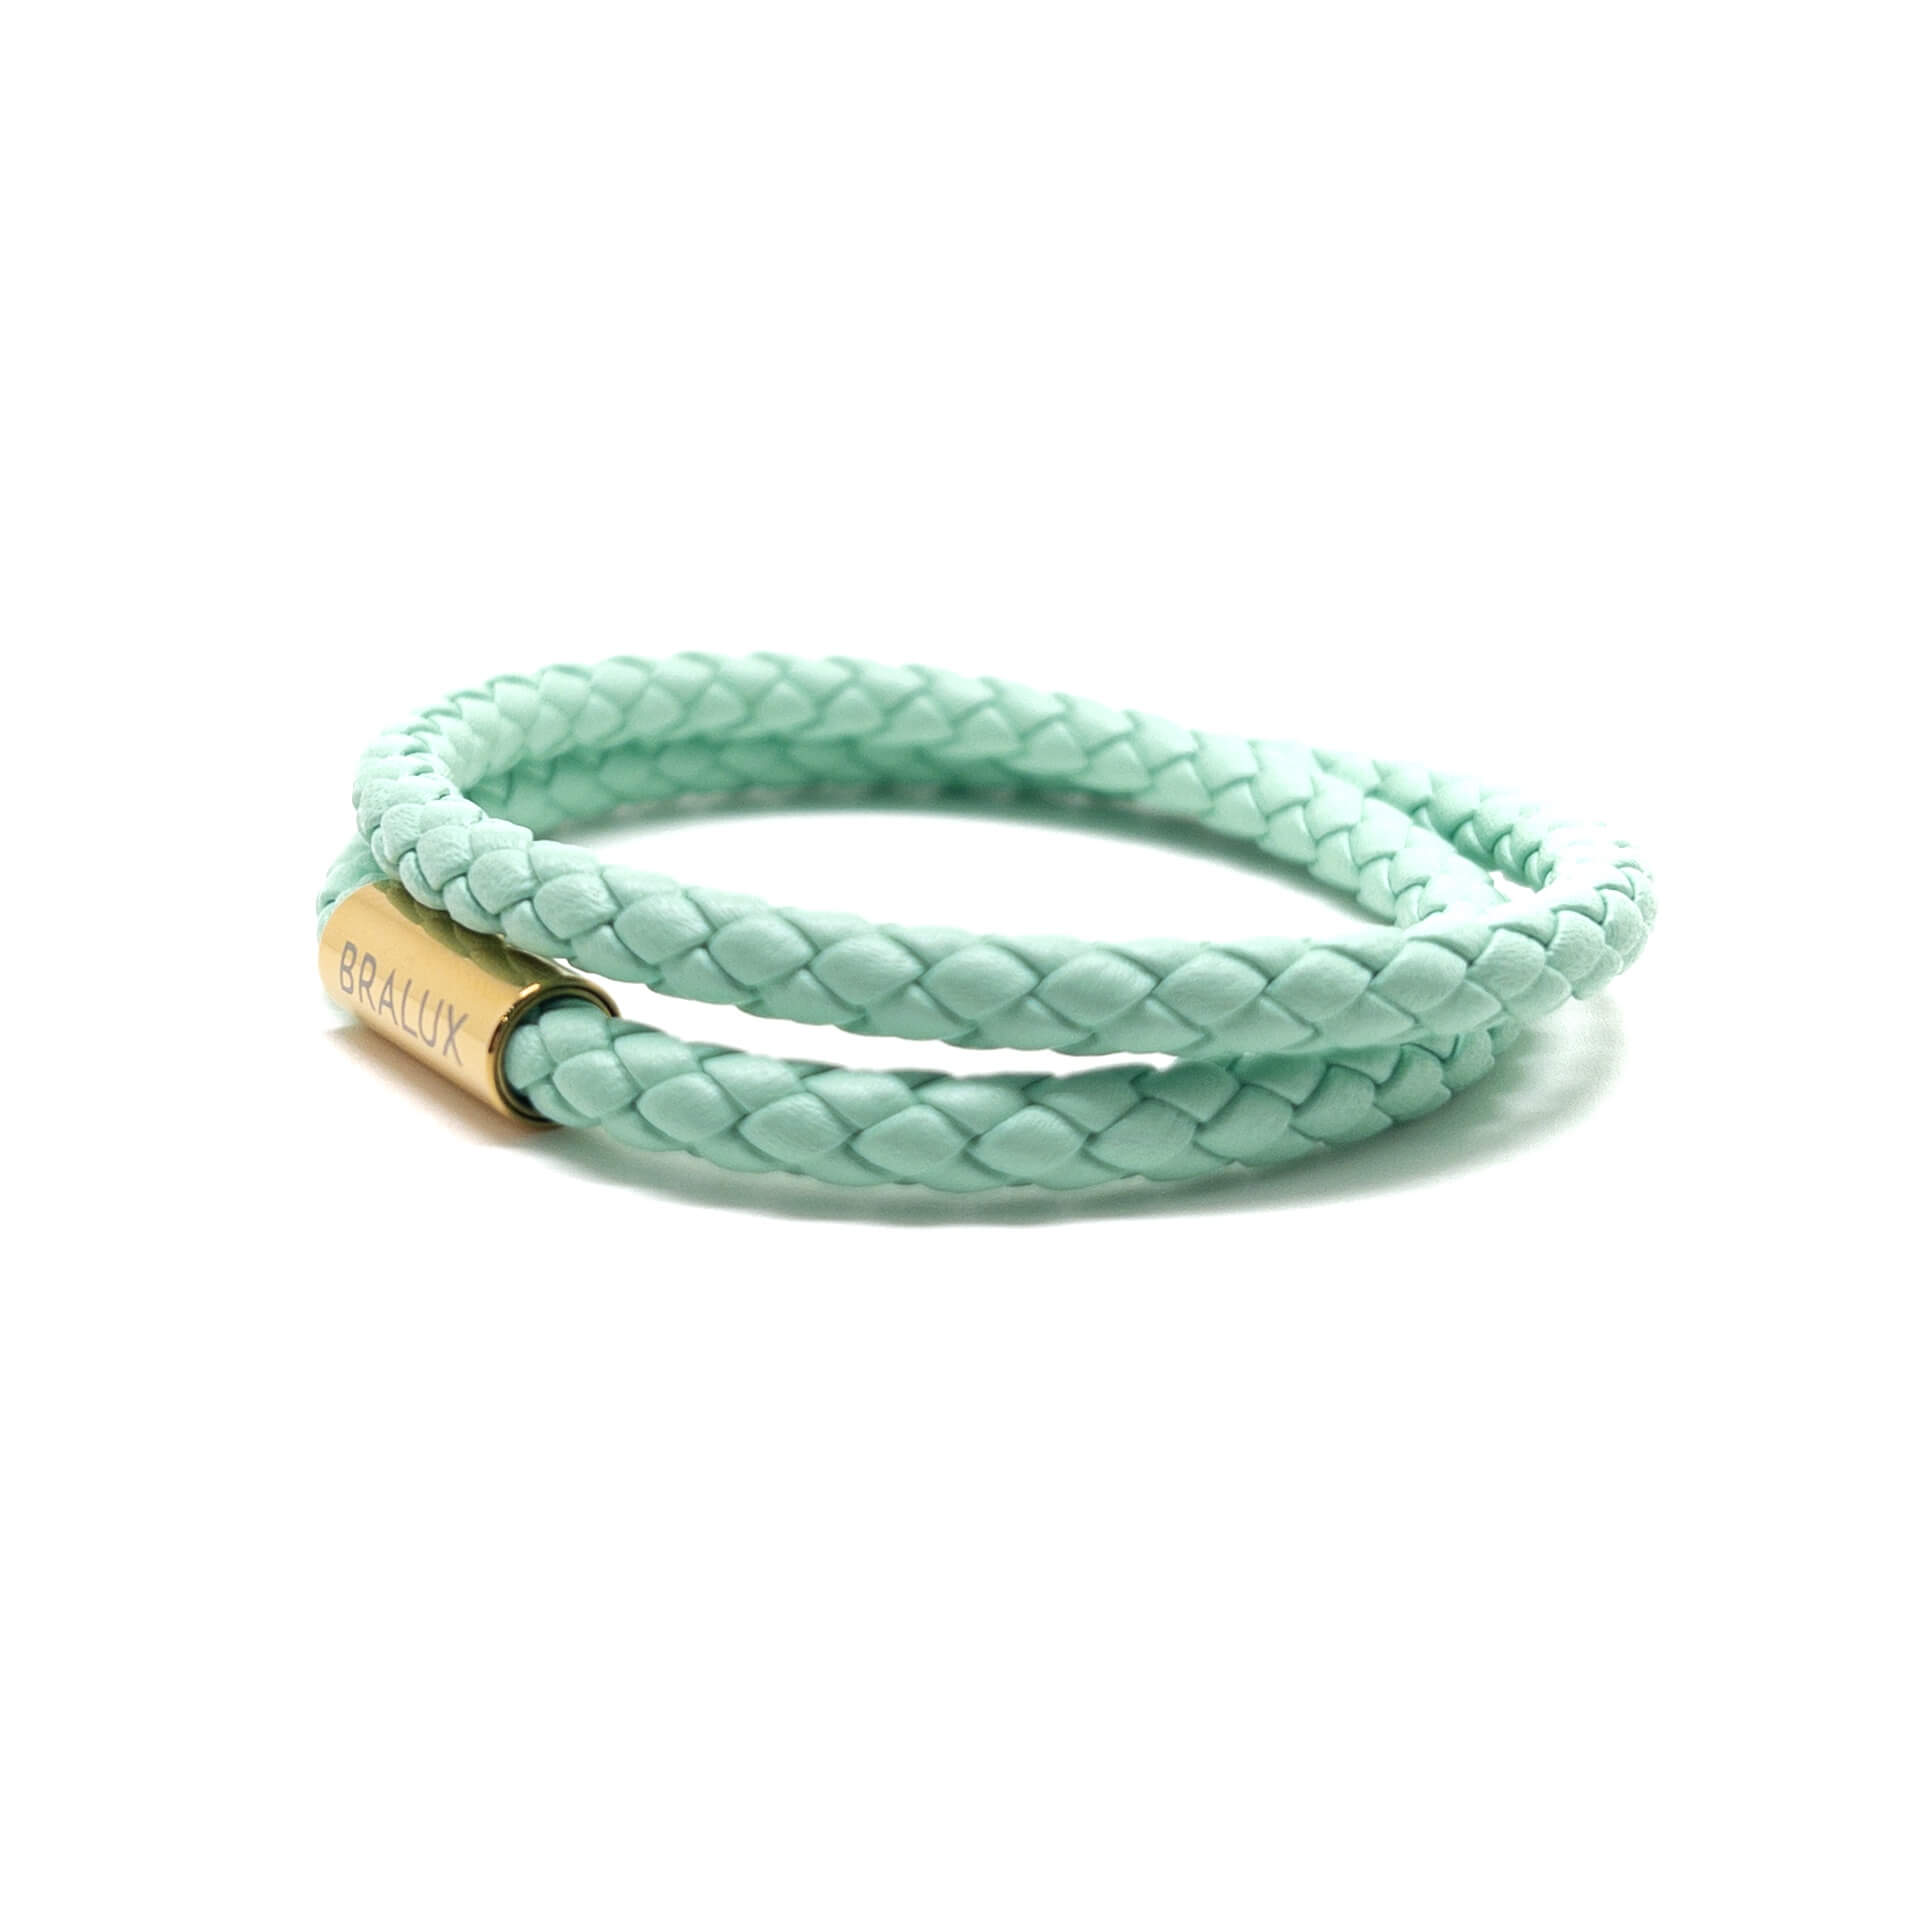 The Duo Light Green Leather Bracelet